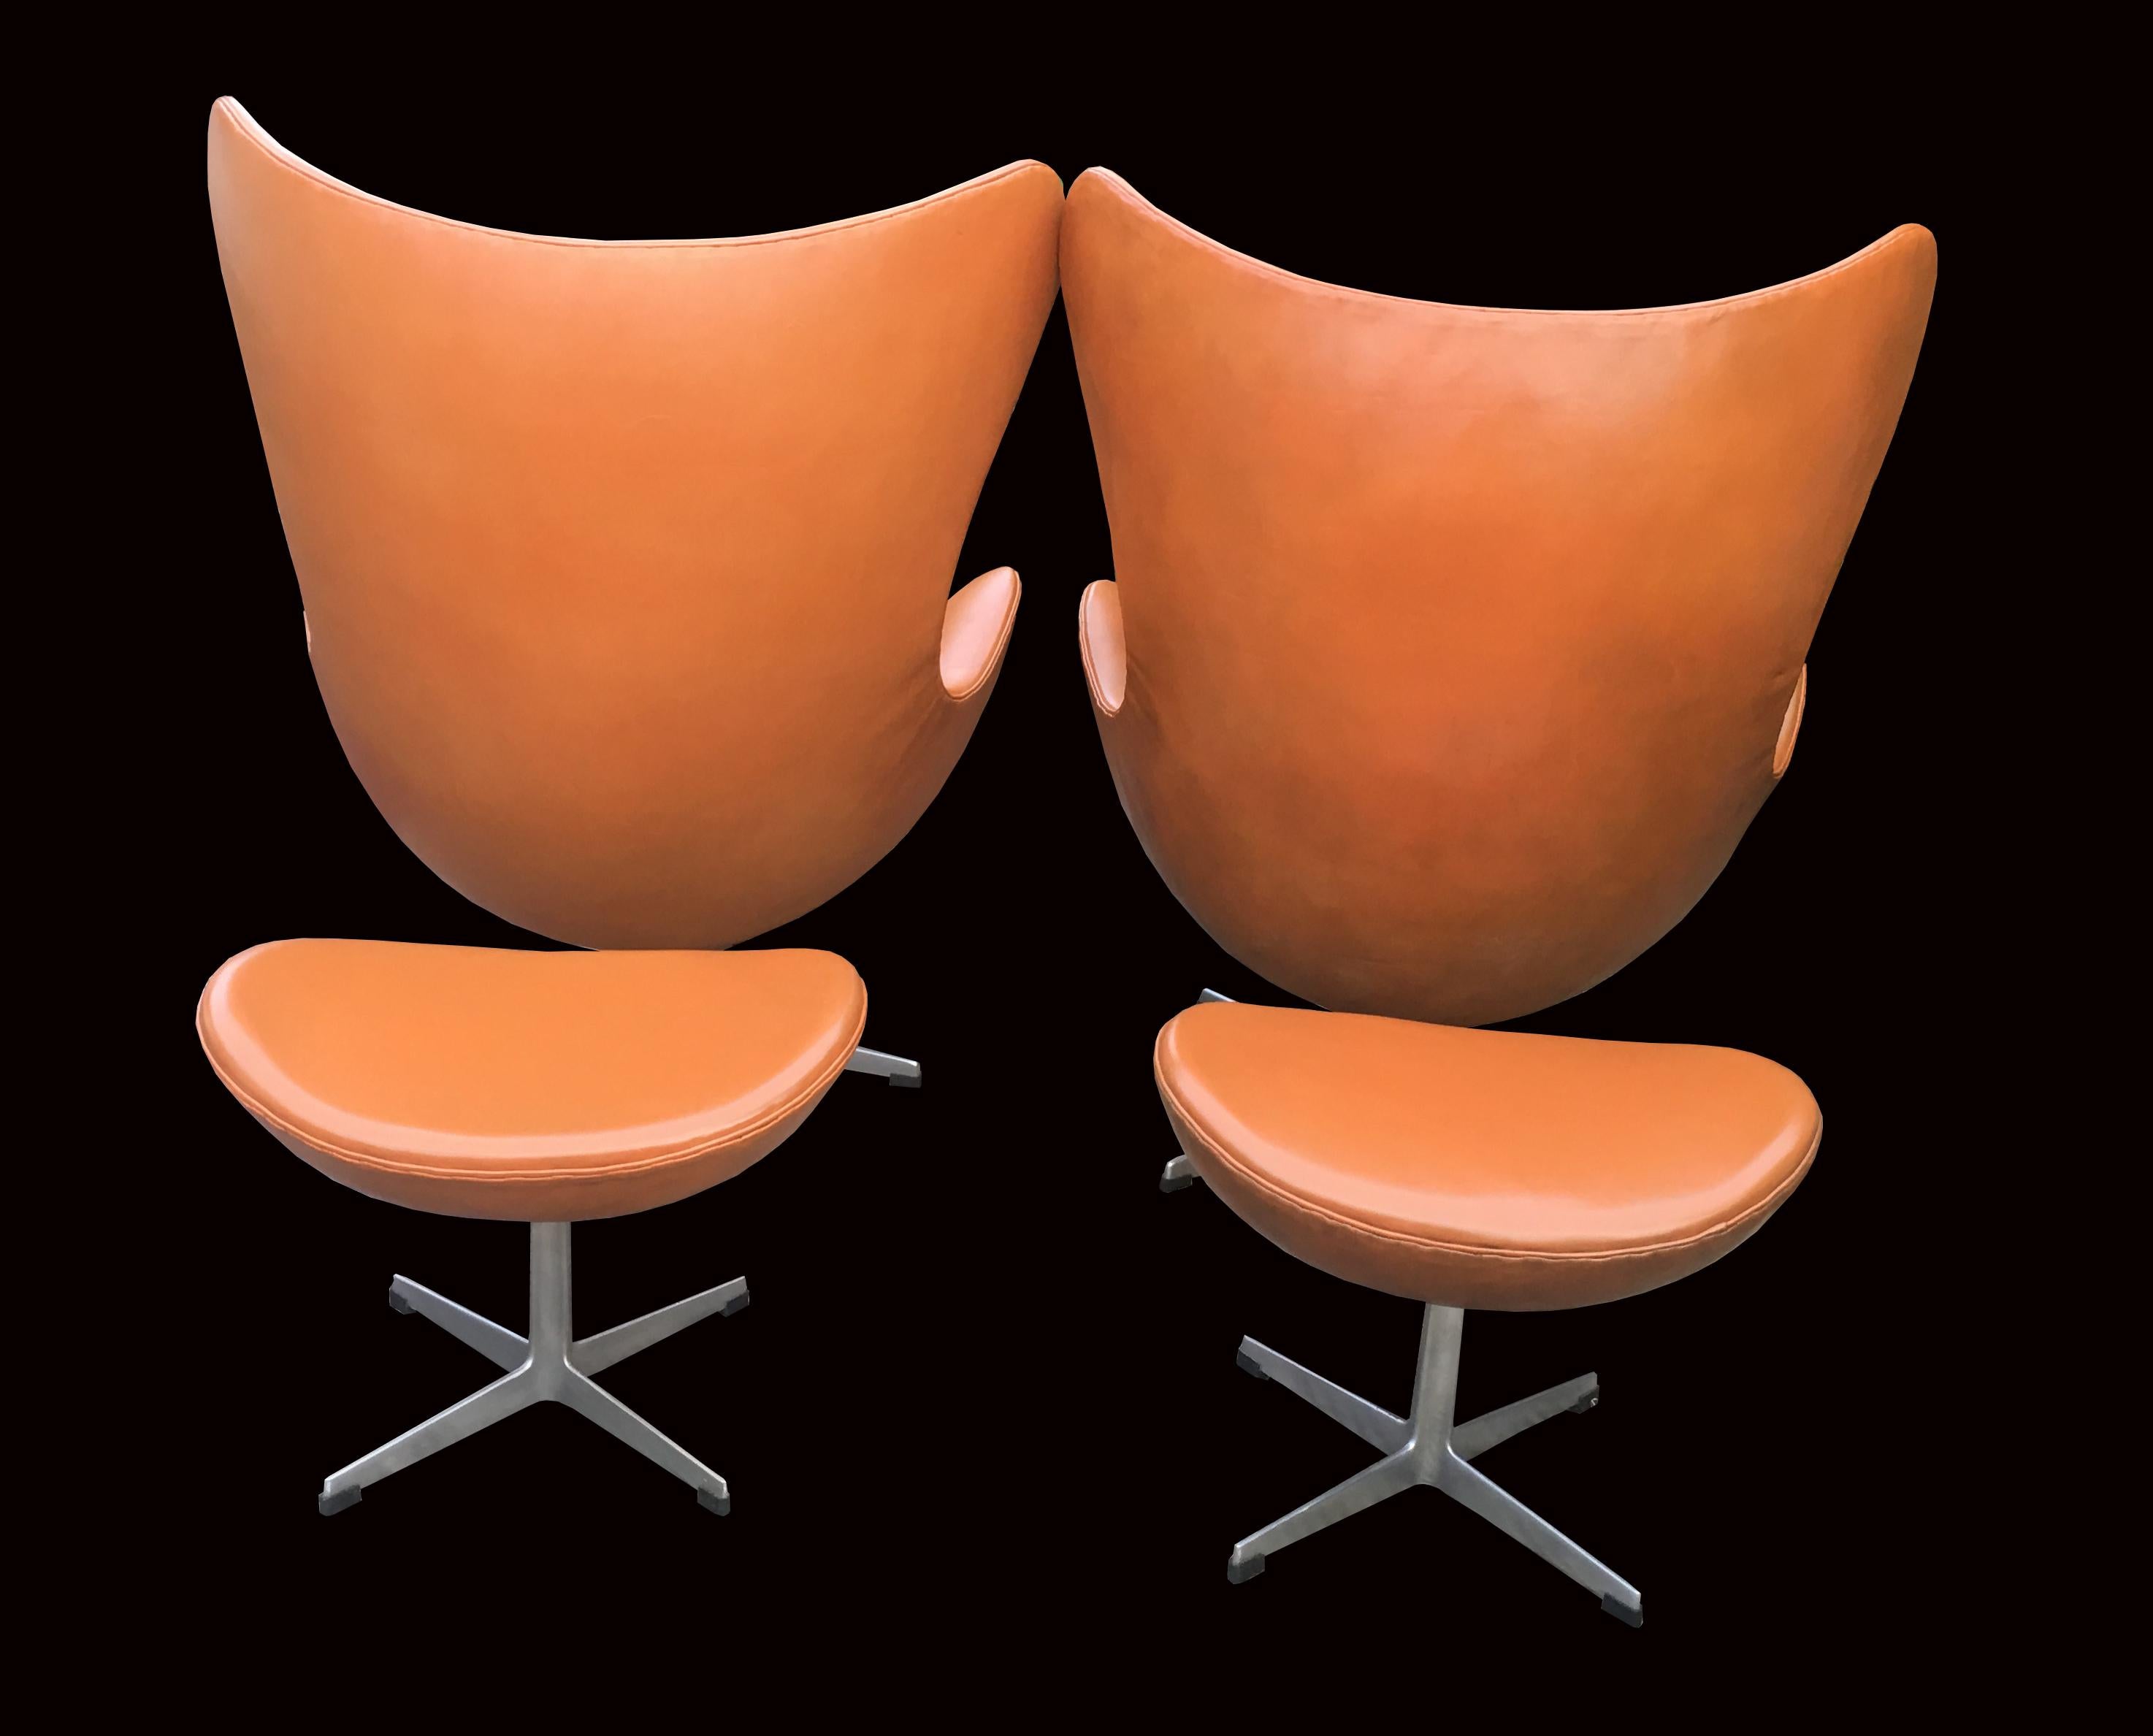 Aluminum Pair of Cognac Leather Egg Chairs and Ottomans by Arne Jacobsen for Fritz Hansen